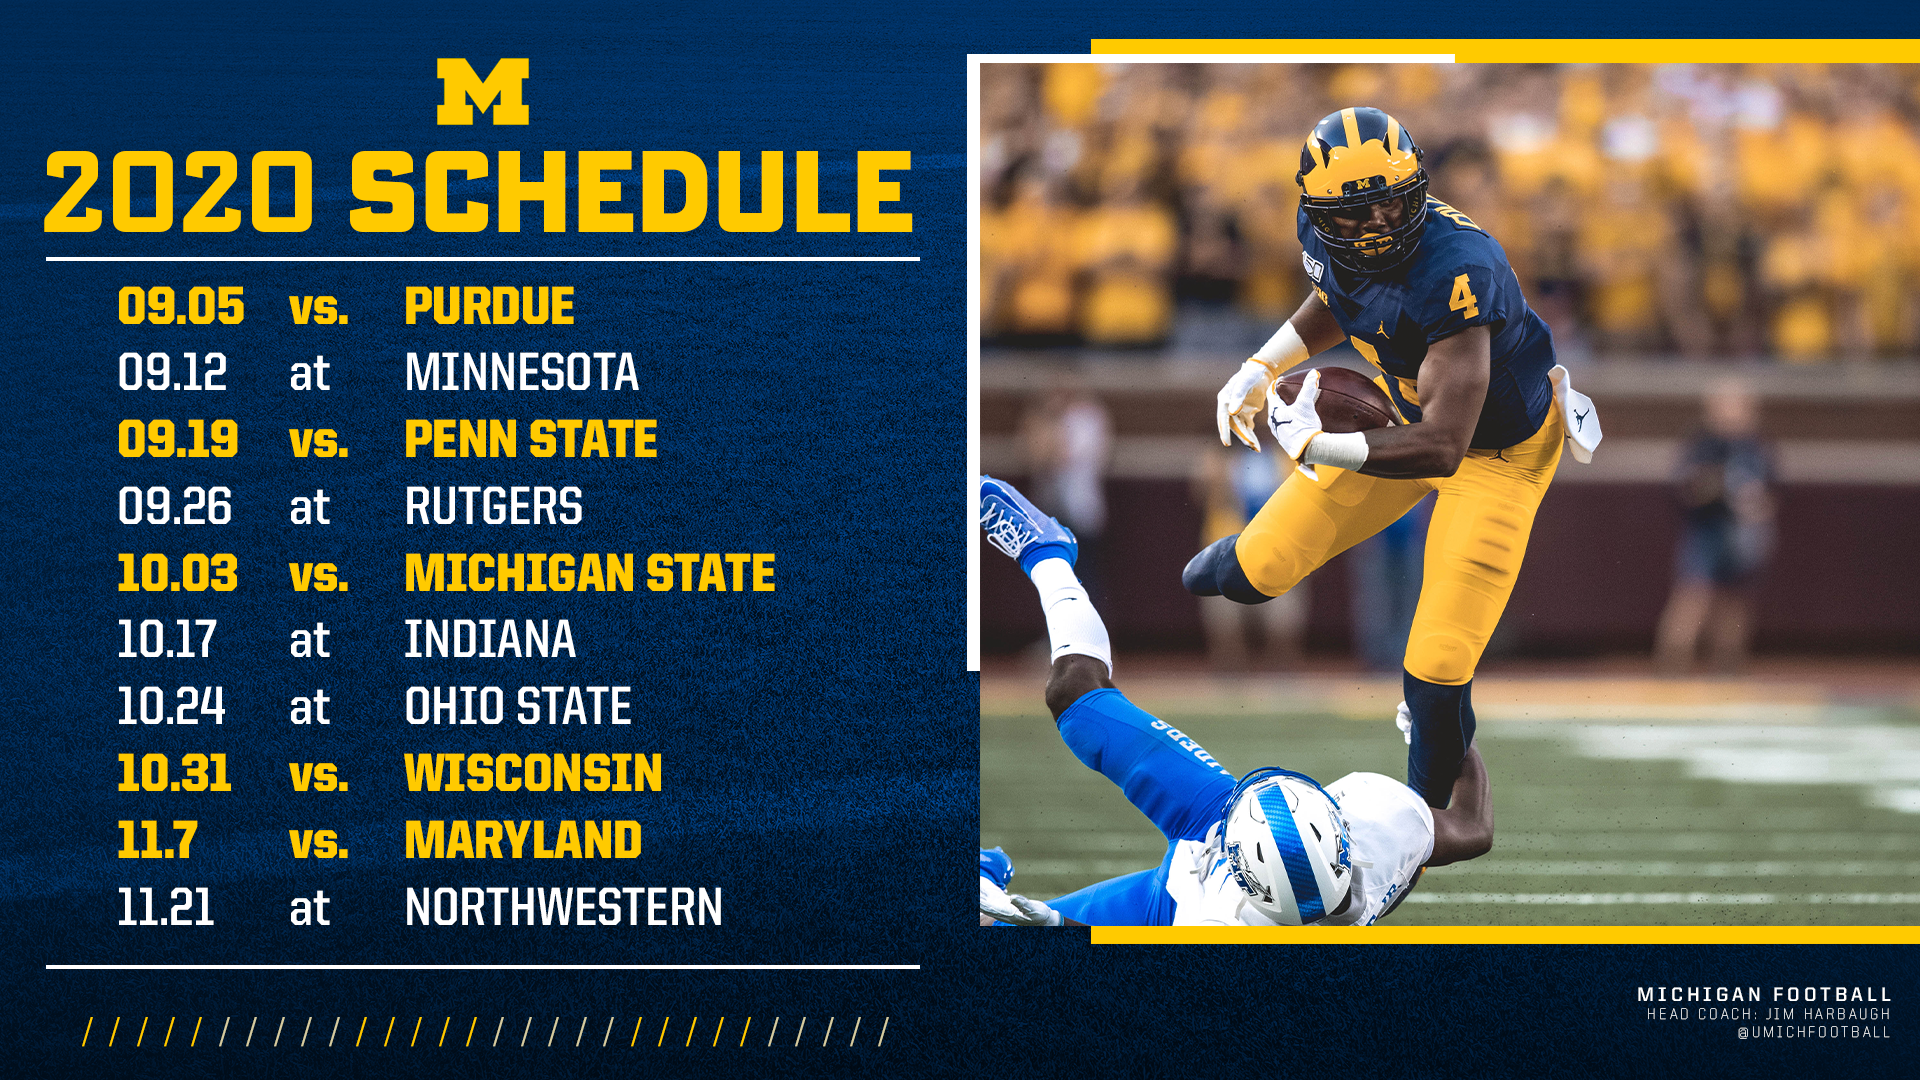 Michigan Football Schedule 2022 Printable Michigan Football On Twitter: "Our [New] 2020 Schedule Is Here. 🙌  Https://T.co/Wg5Ccjbtlc" / Twitter